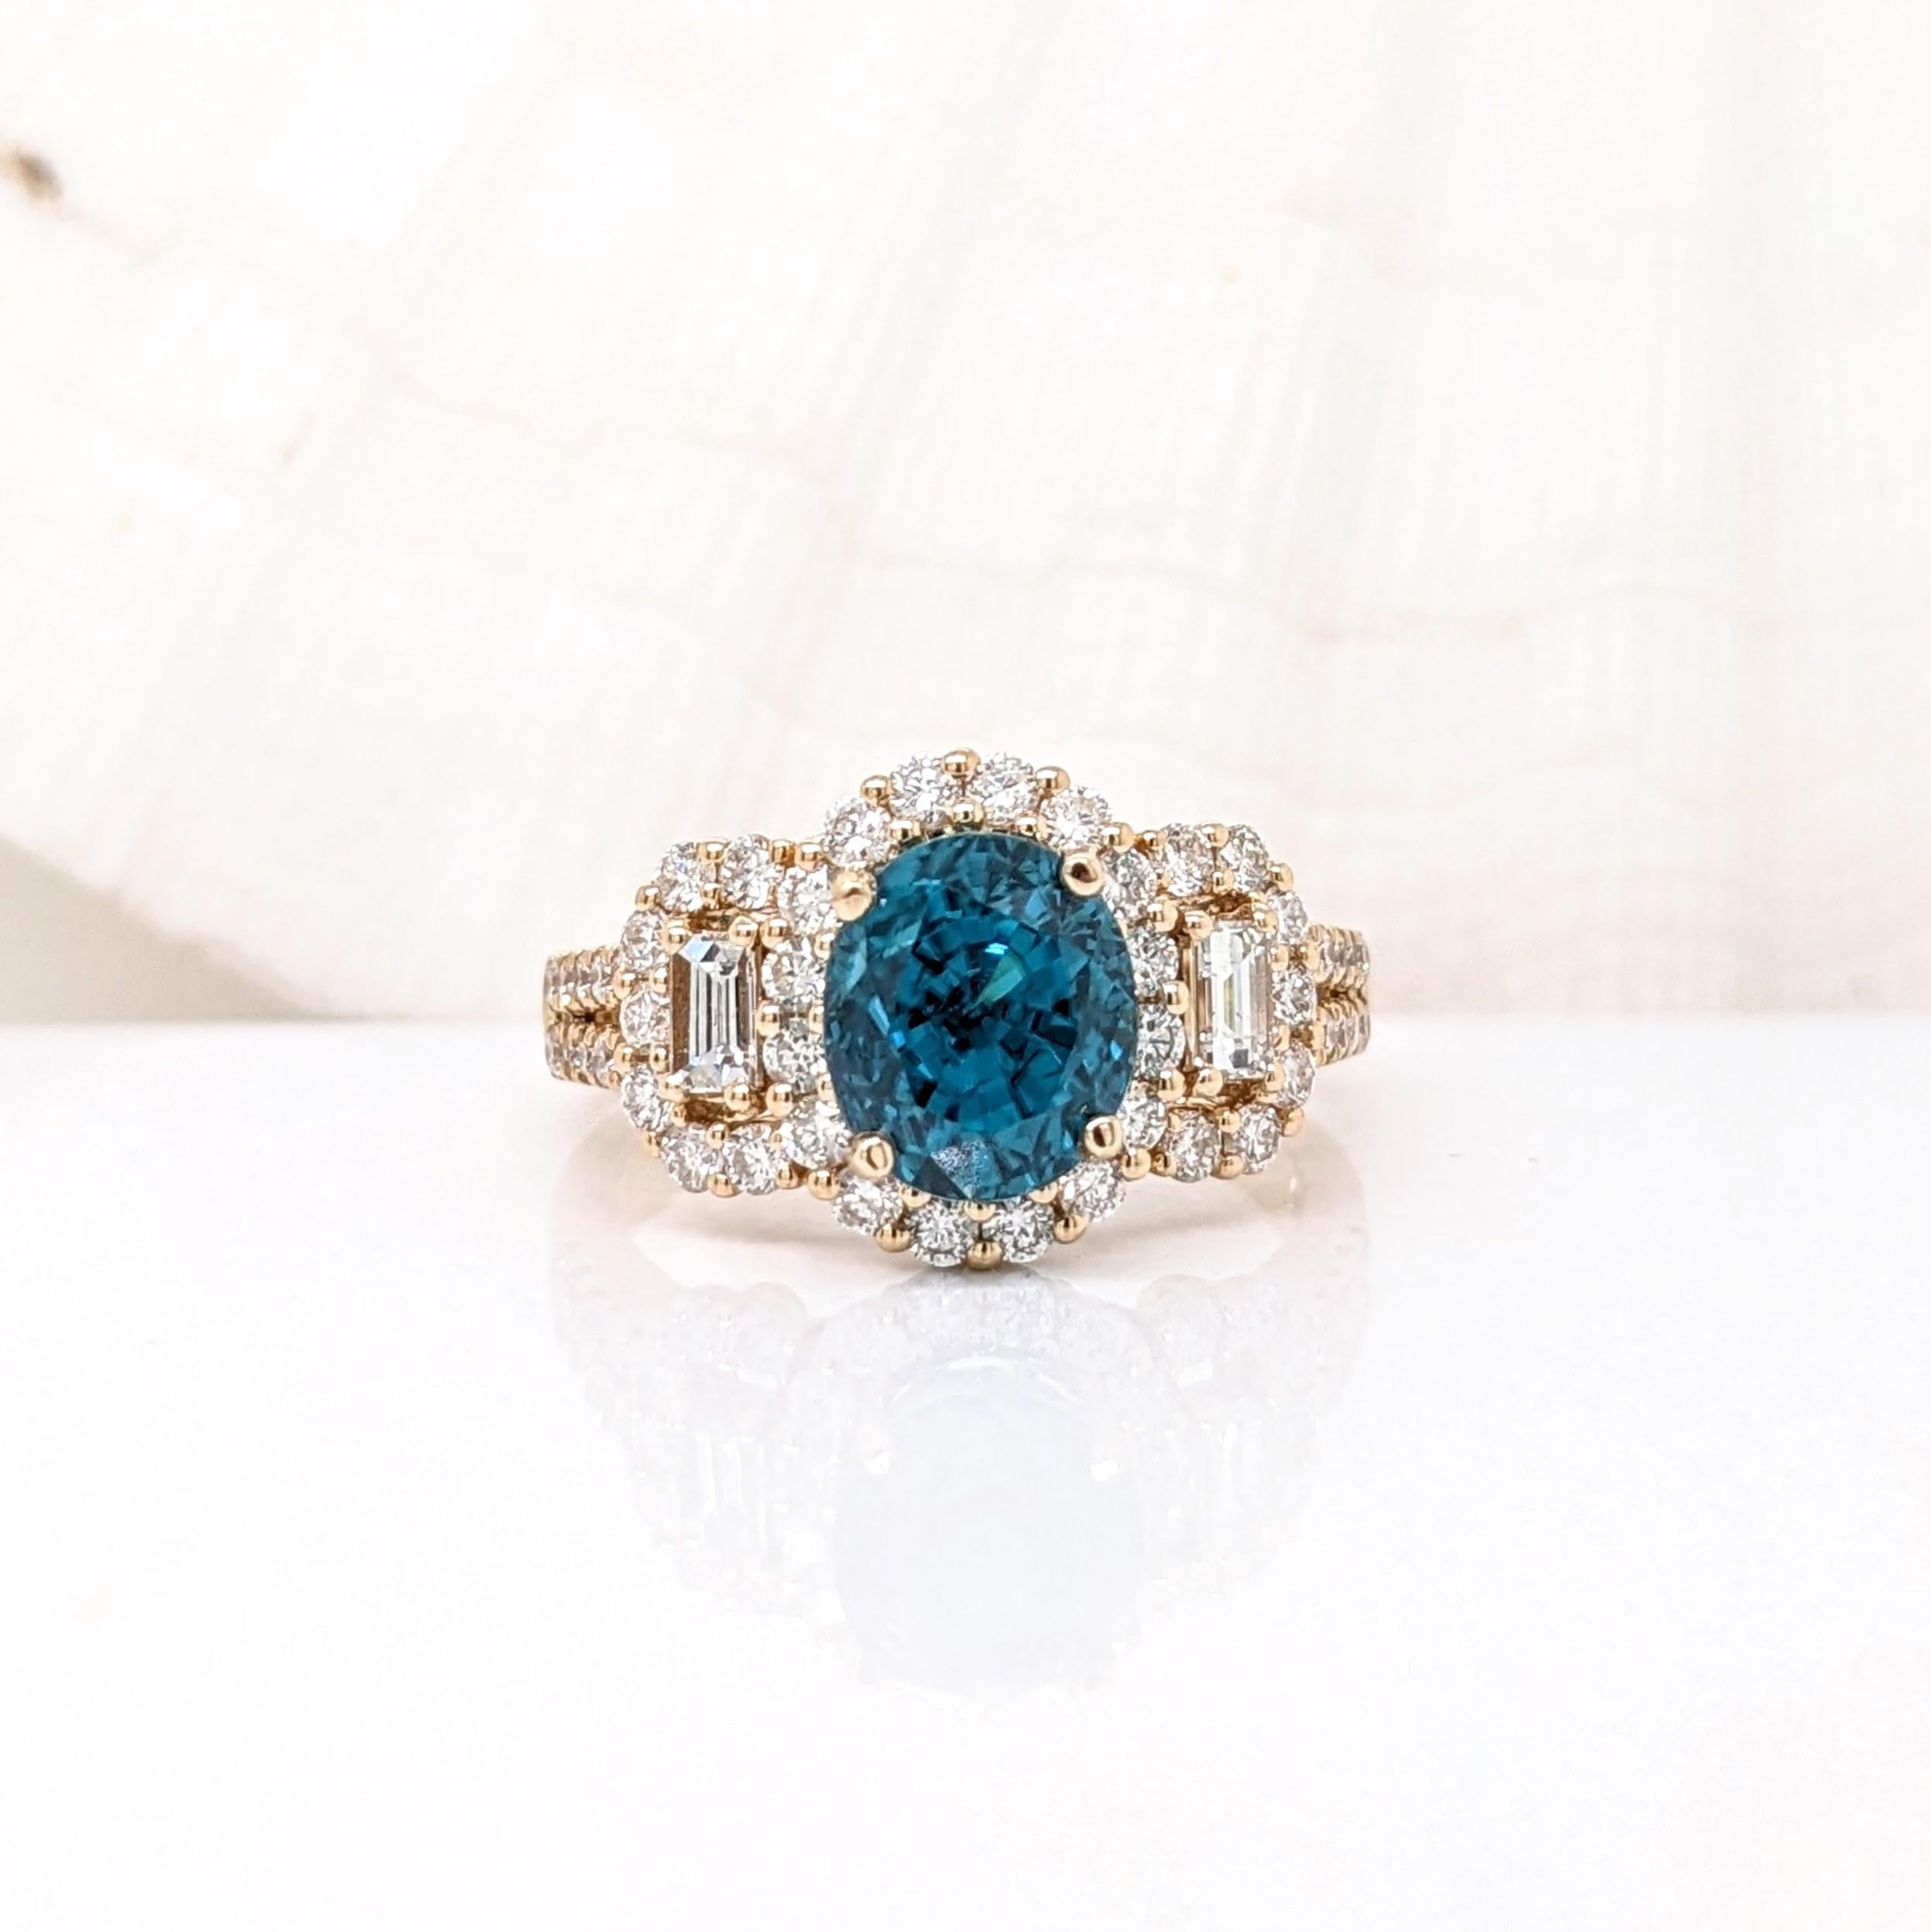 This statement ring features a stunning blue zircon in 14K solid yellow gold with beautiful baguette and round diamond accents and a unique split shank design. This collection ring makes for a gorgeous accessory to any look!

Fun Fact: Zircons are